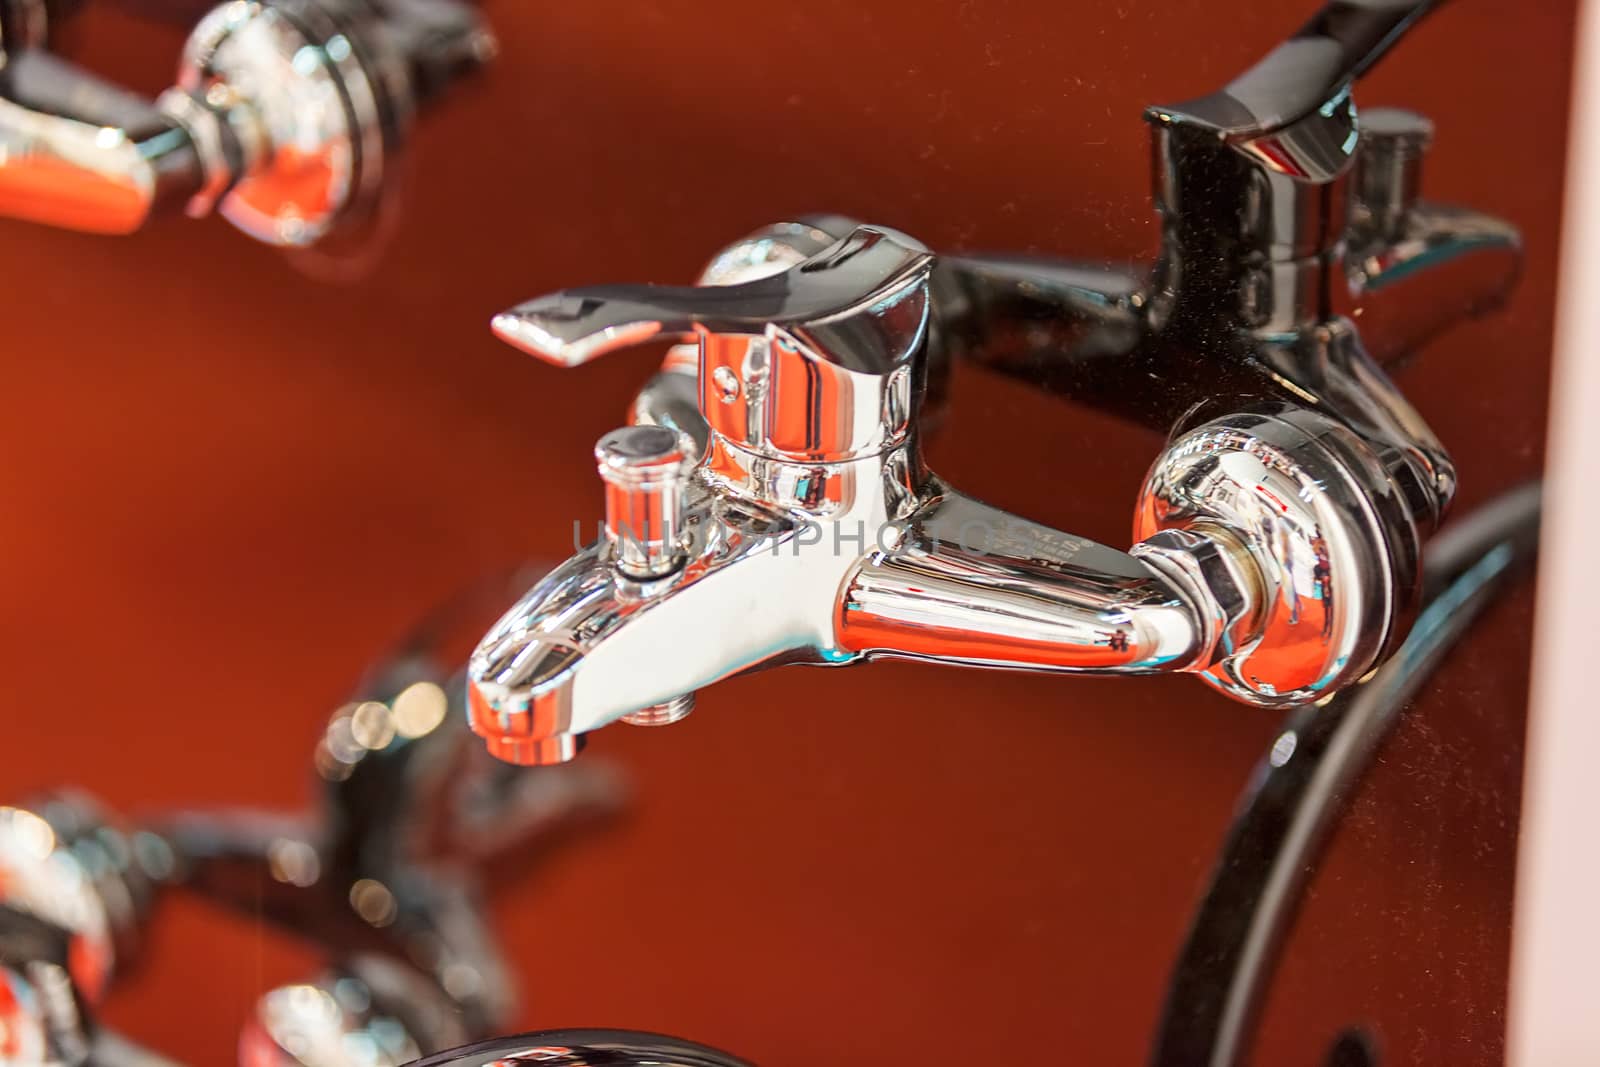 new types of taps for bathroom, note shallow depth of field